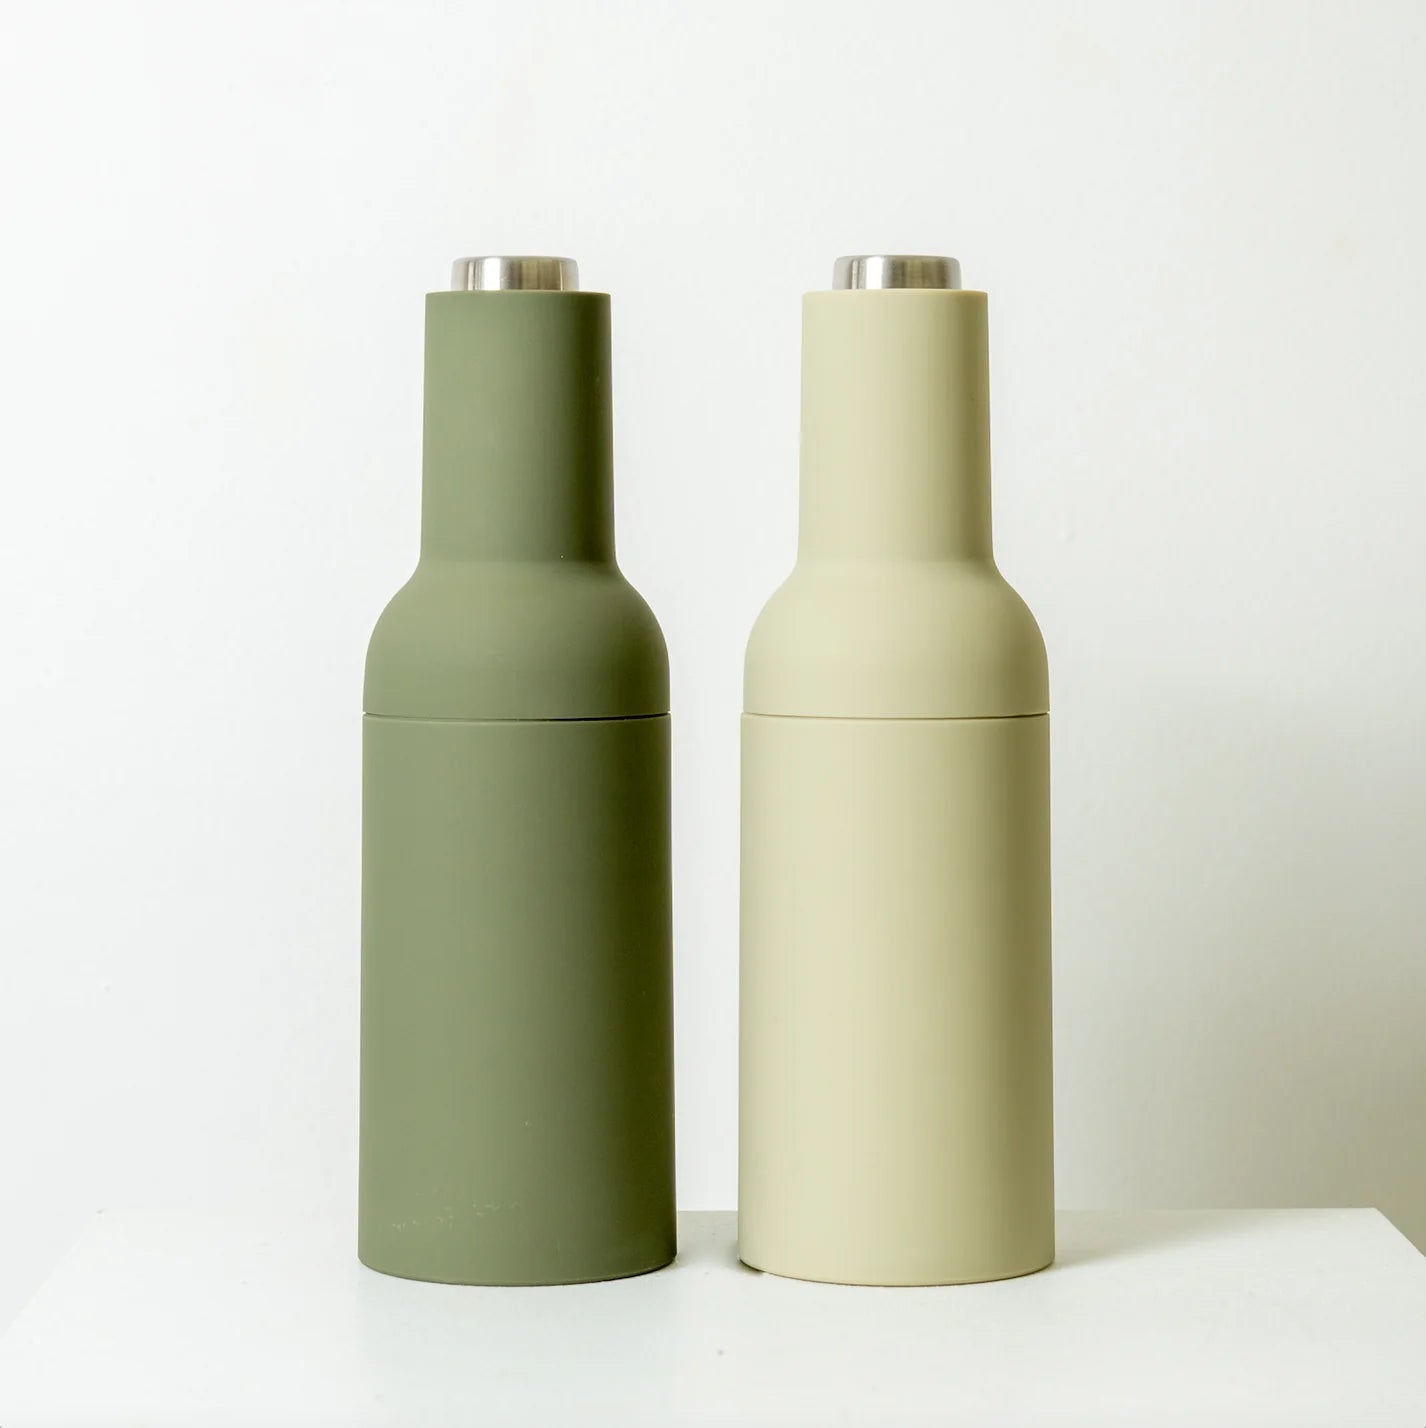 Thea Automatic Salt + Pepper Grinders - Sage Green + Olive